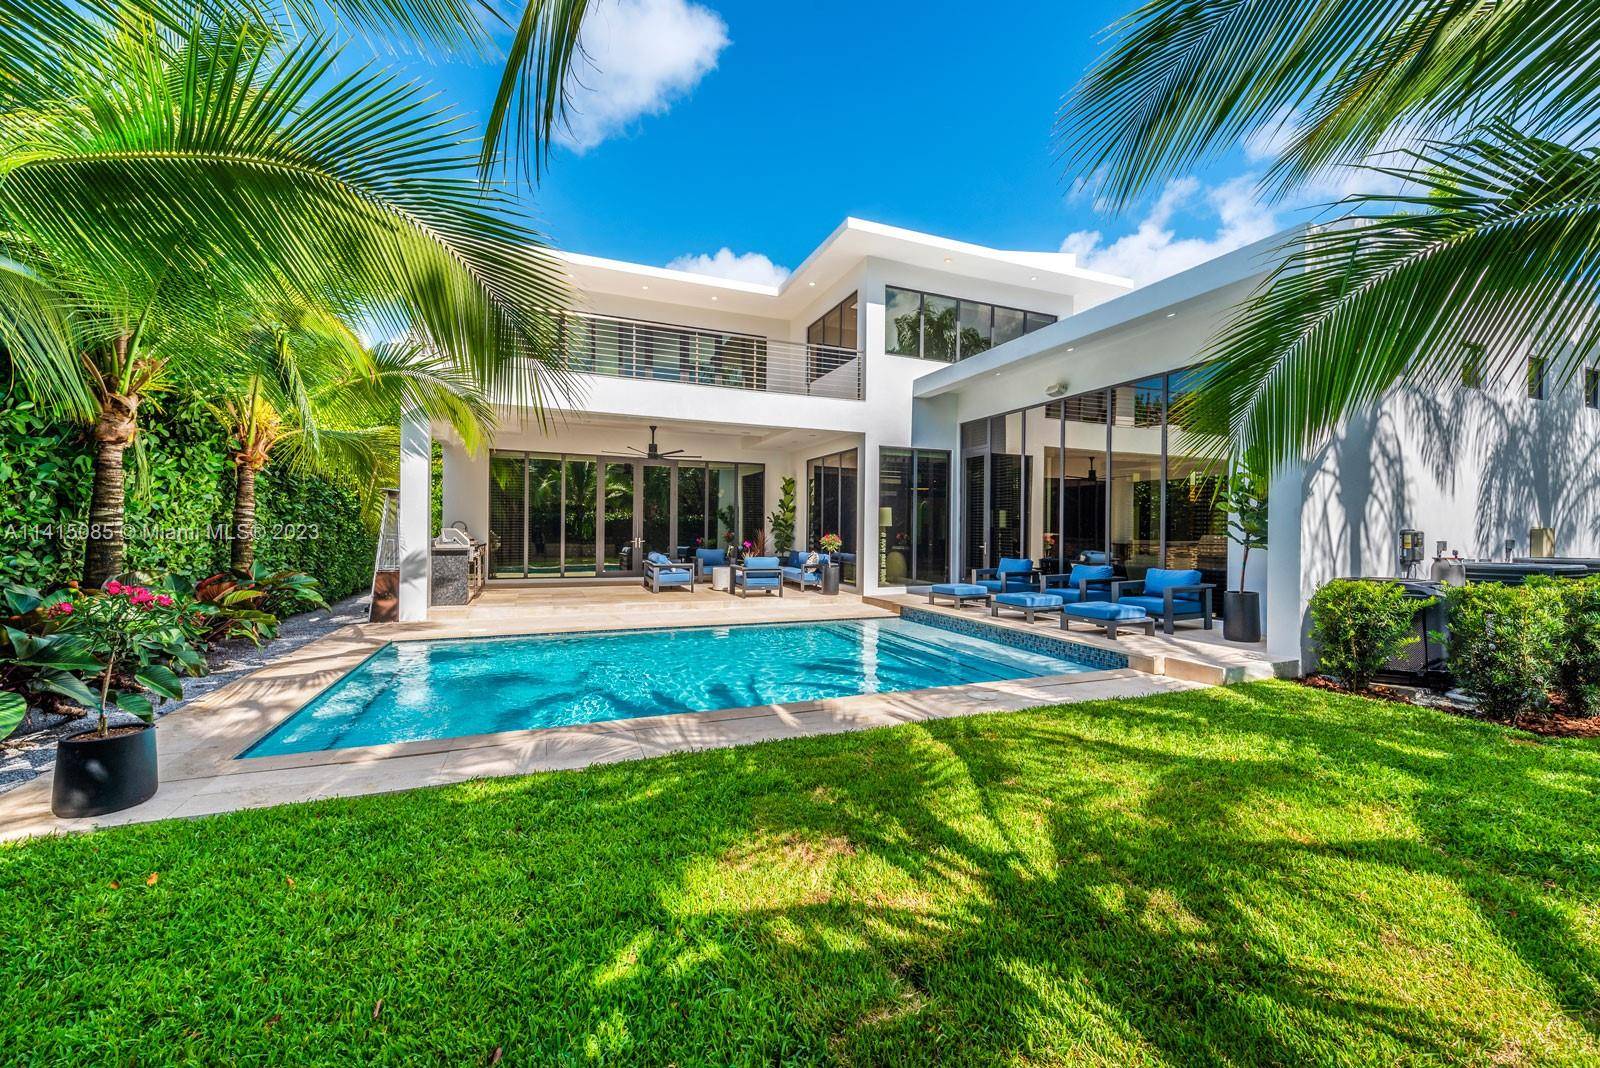 Exquisite, one of a kind home on a quiet tree lined street in coveted South Gables neighborhood.